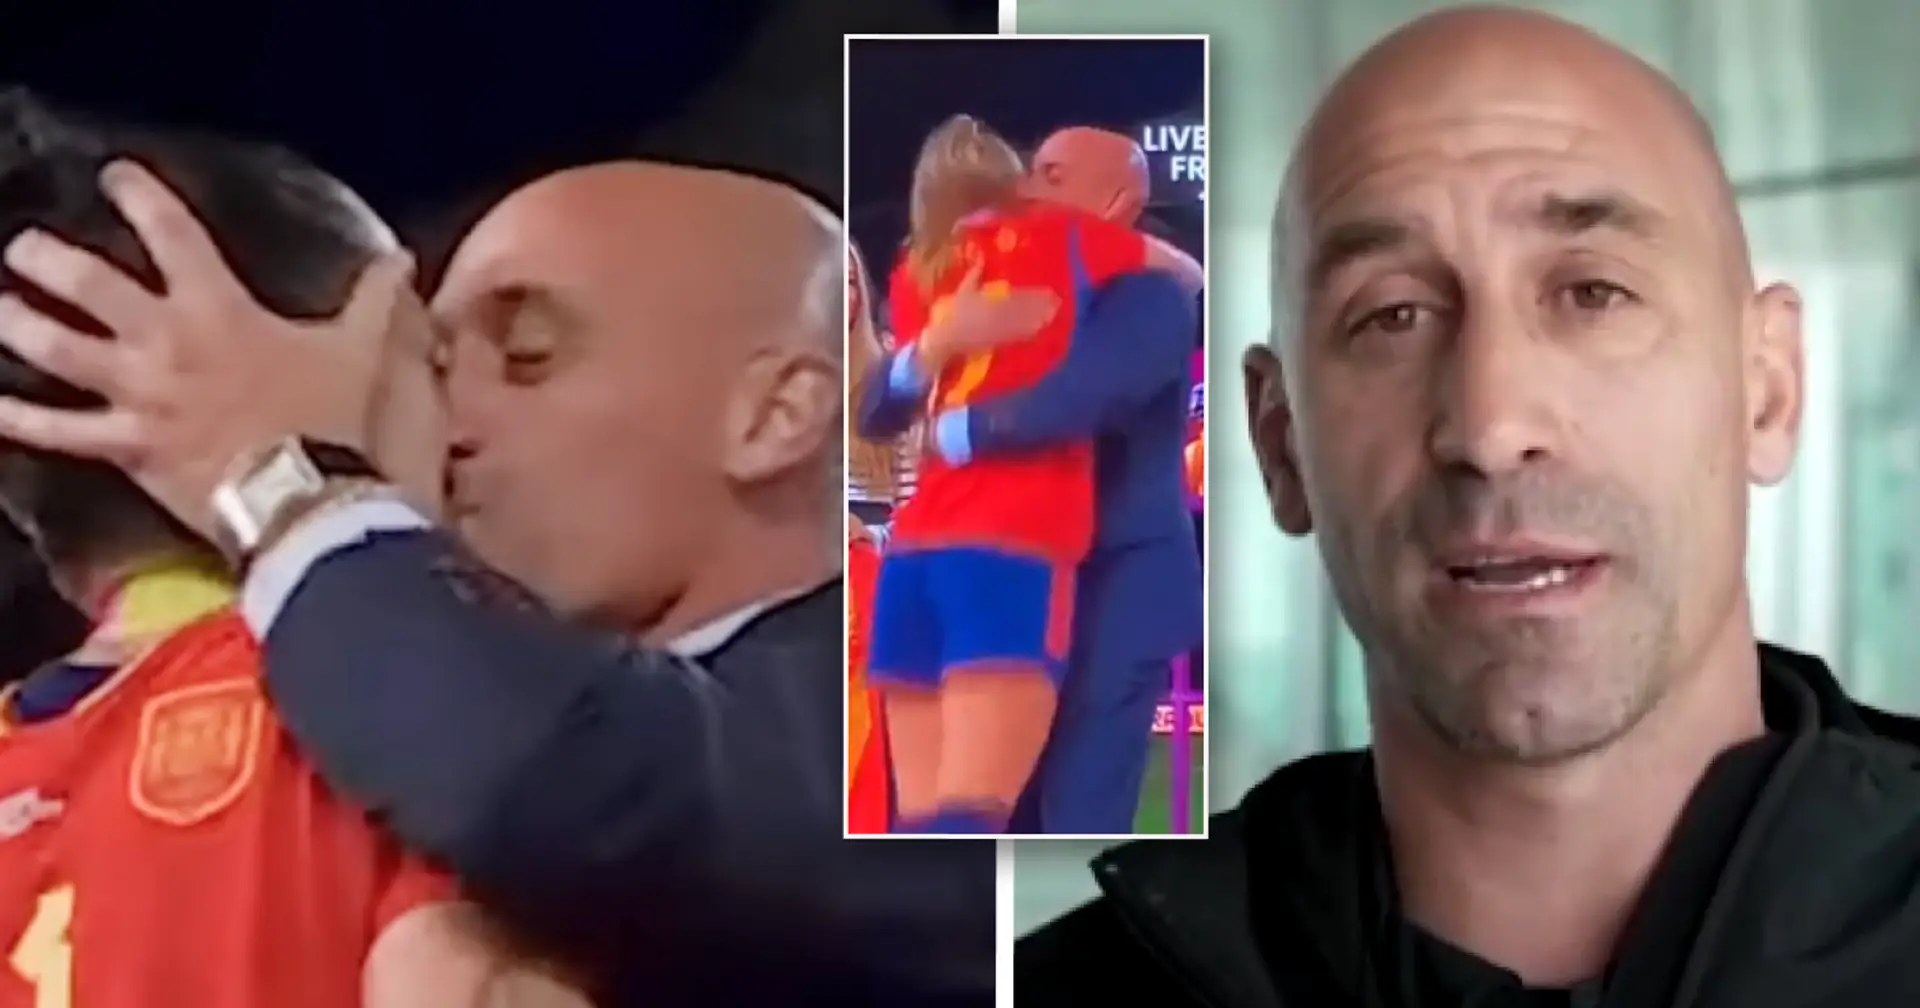 FA boss kisses Barca Femeni legend Hermoso on the lips during World Cup celebrations, apologizes later